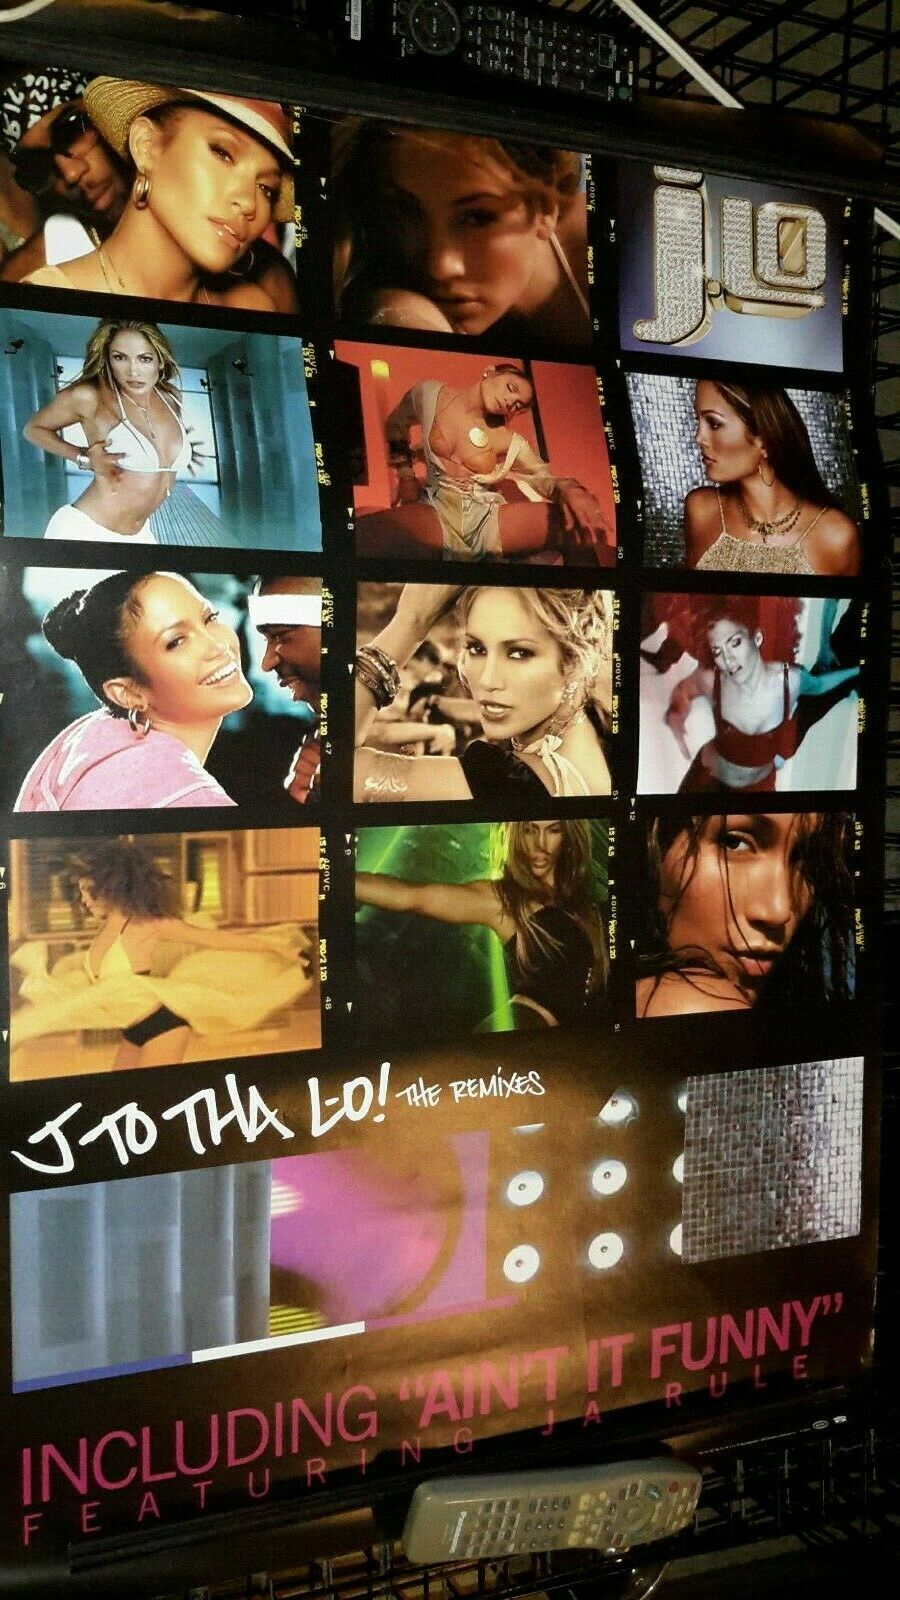 J Lo -j To The Lo! The Remixes-1 Poster- 24 X 3 6 Inches - Very Rare-oop!!!!